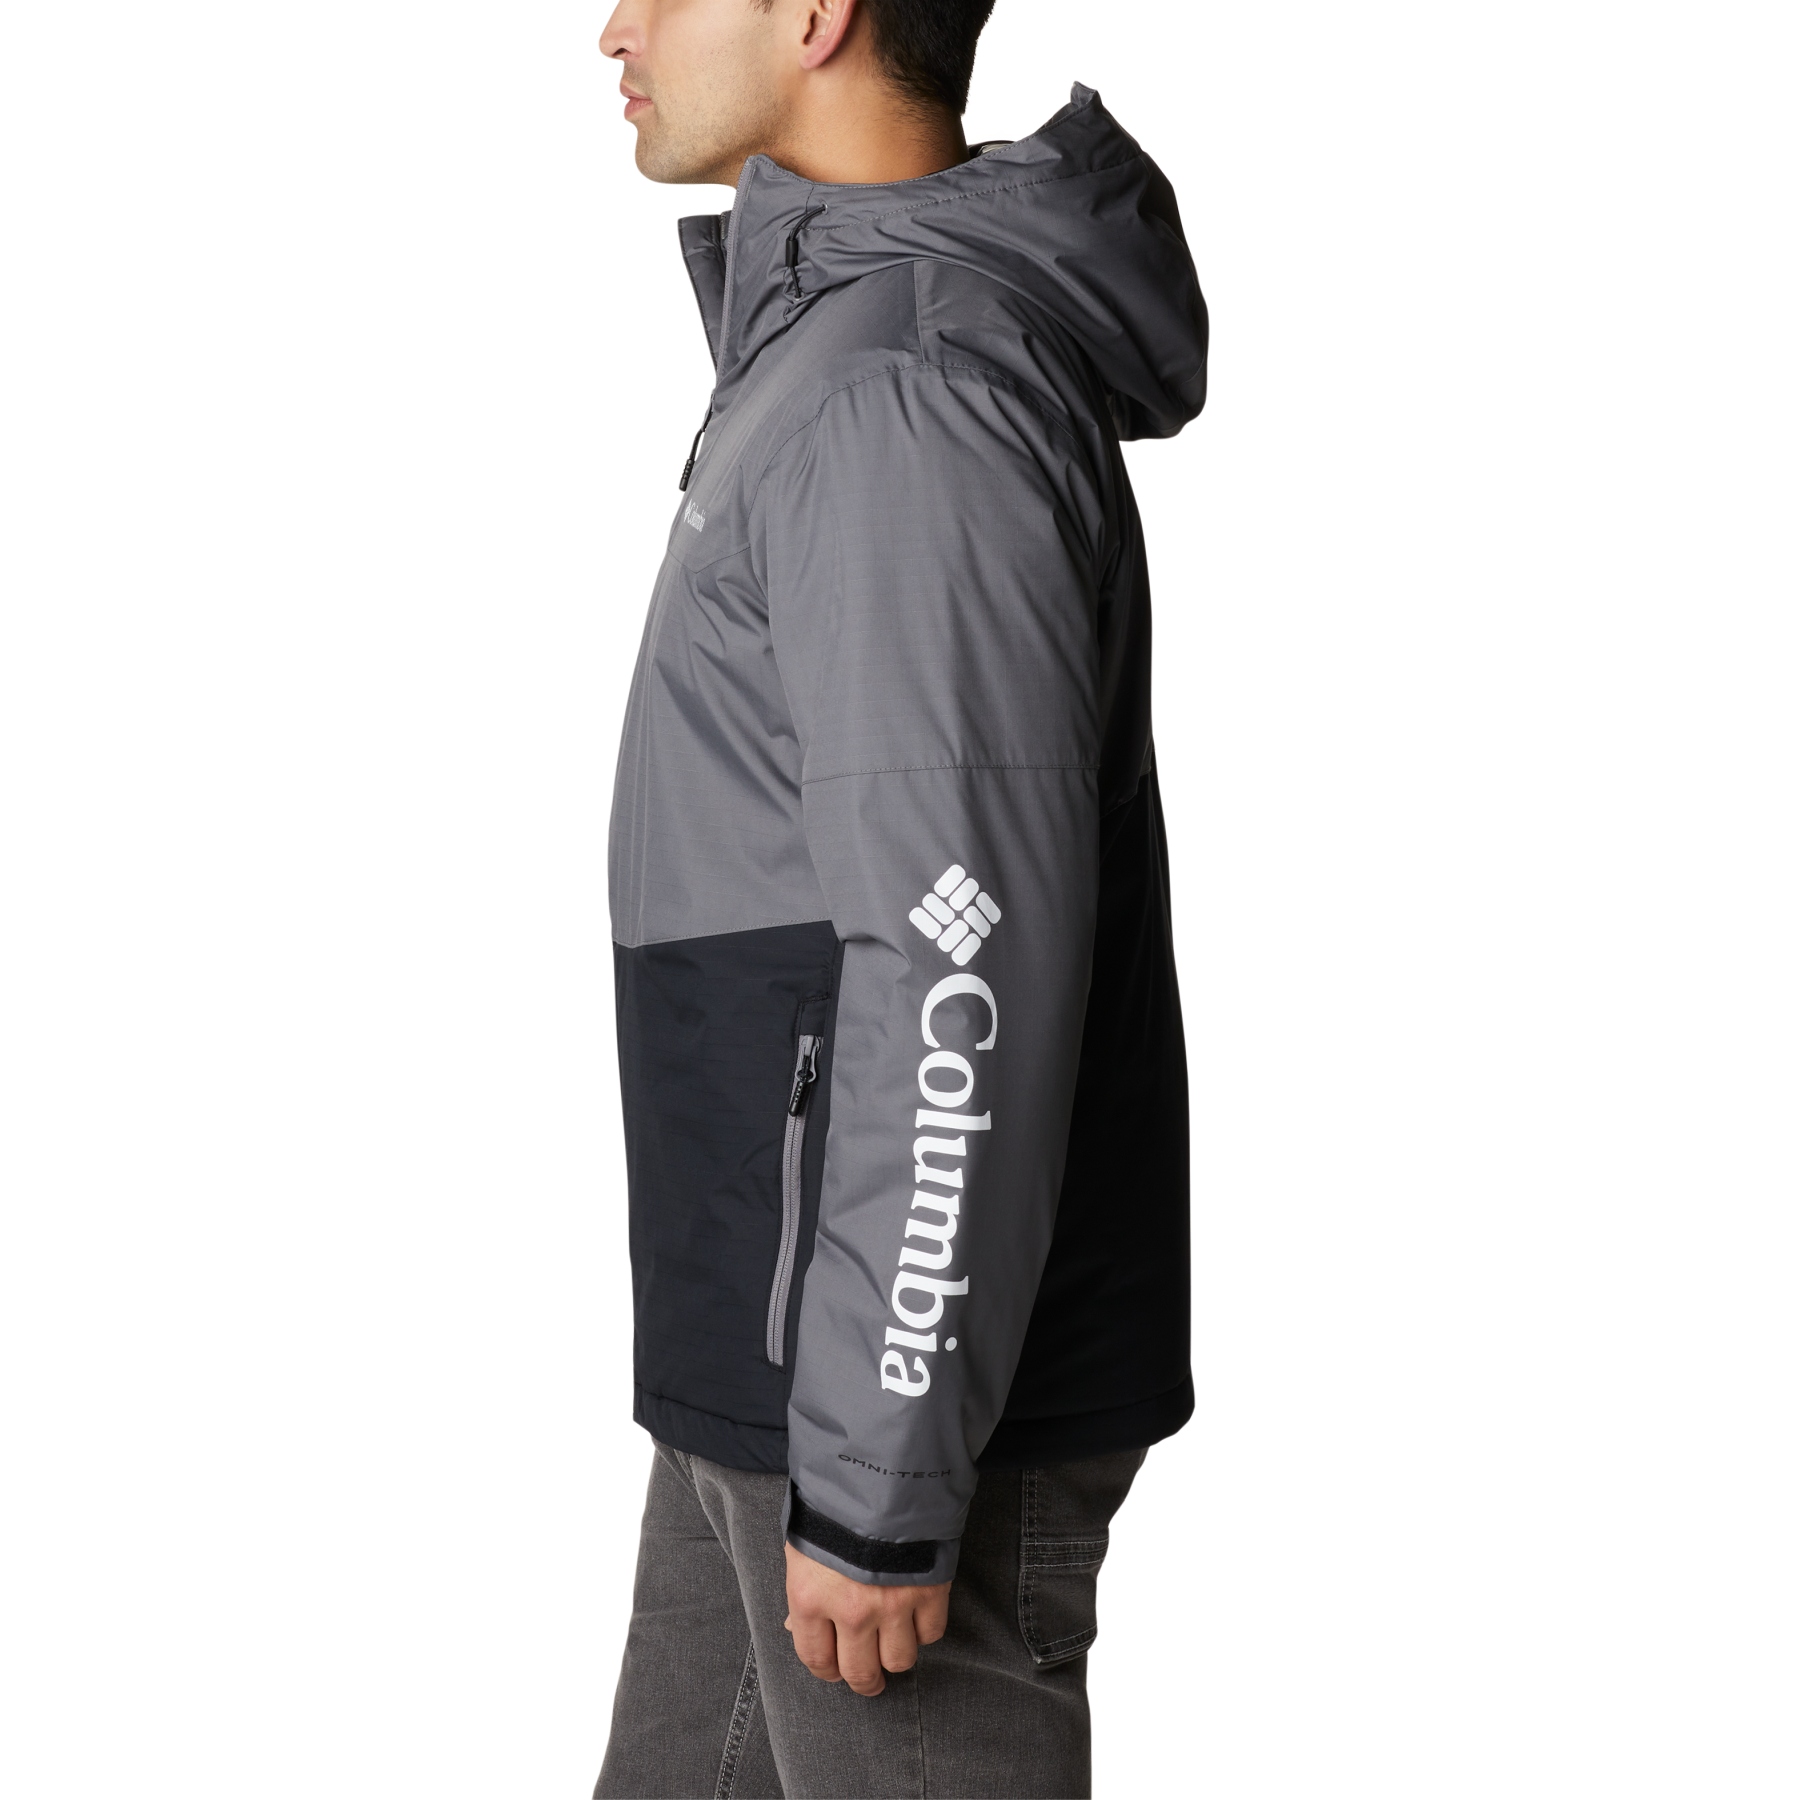 Columbia Point Park Insulated Jacket Men - City Grey/Black